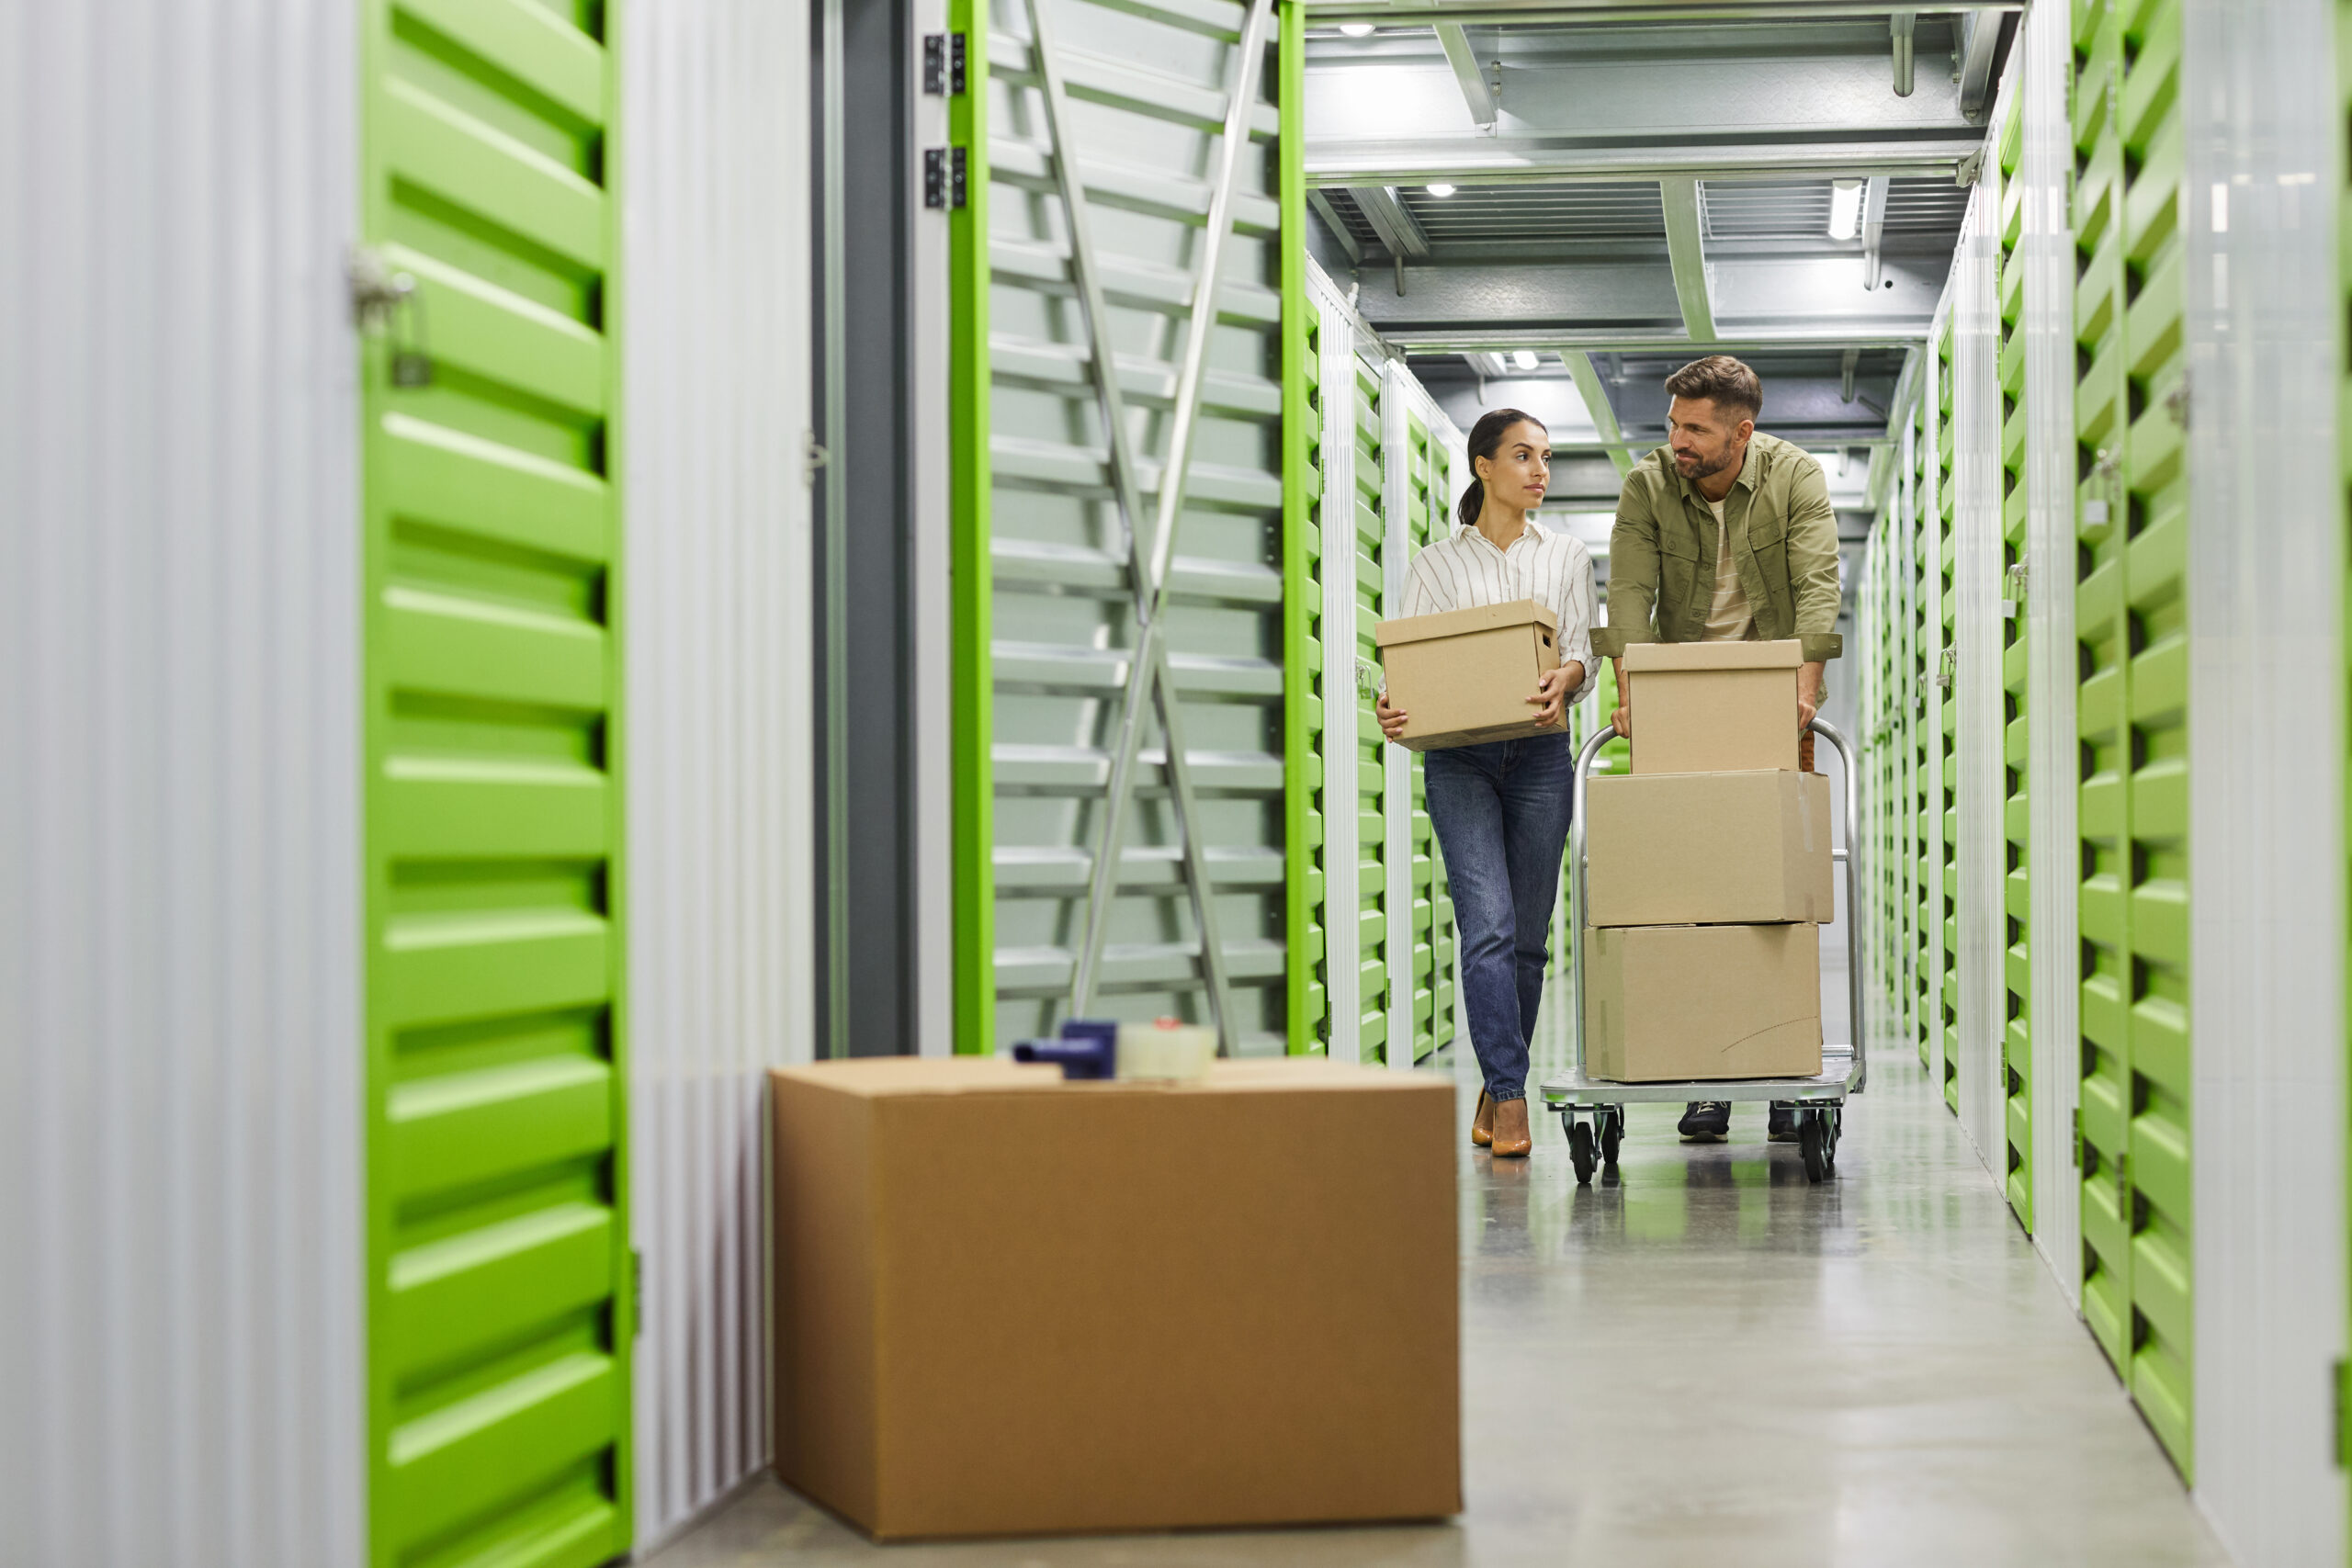 NRI Relocation has short and long term storage for corporate moves